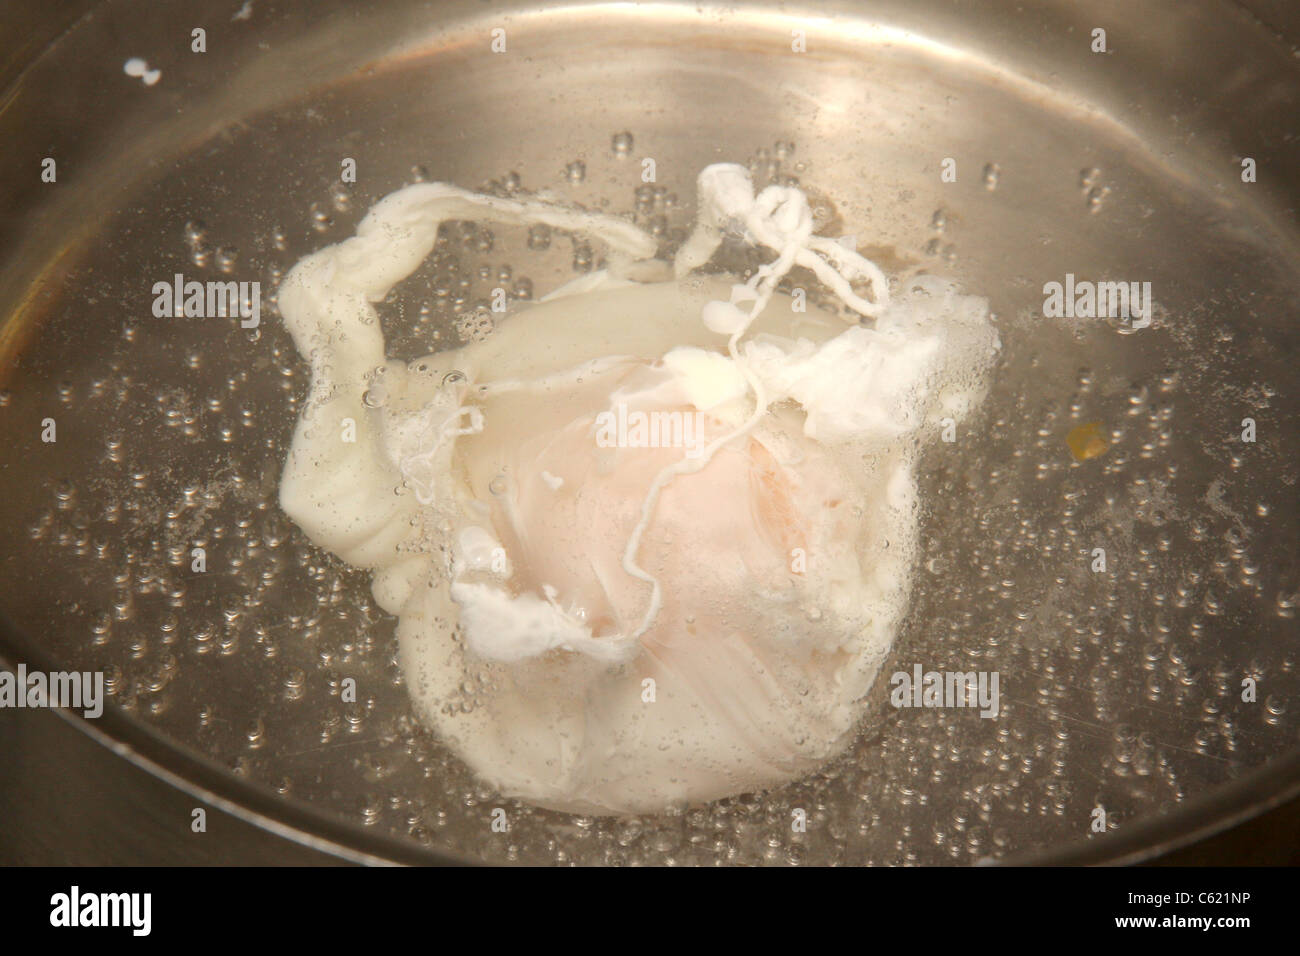 An egg being poached in boiling water. Stock Photo